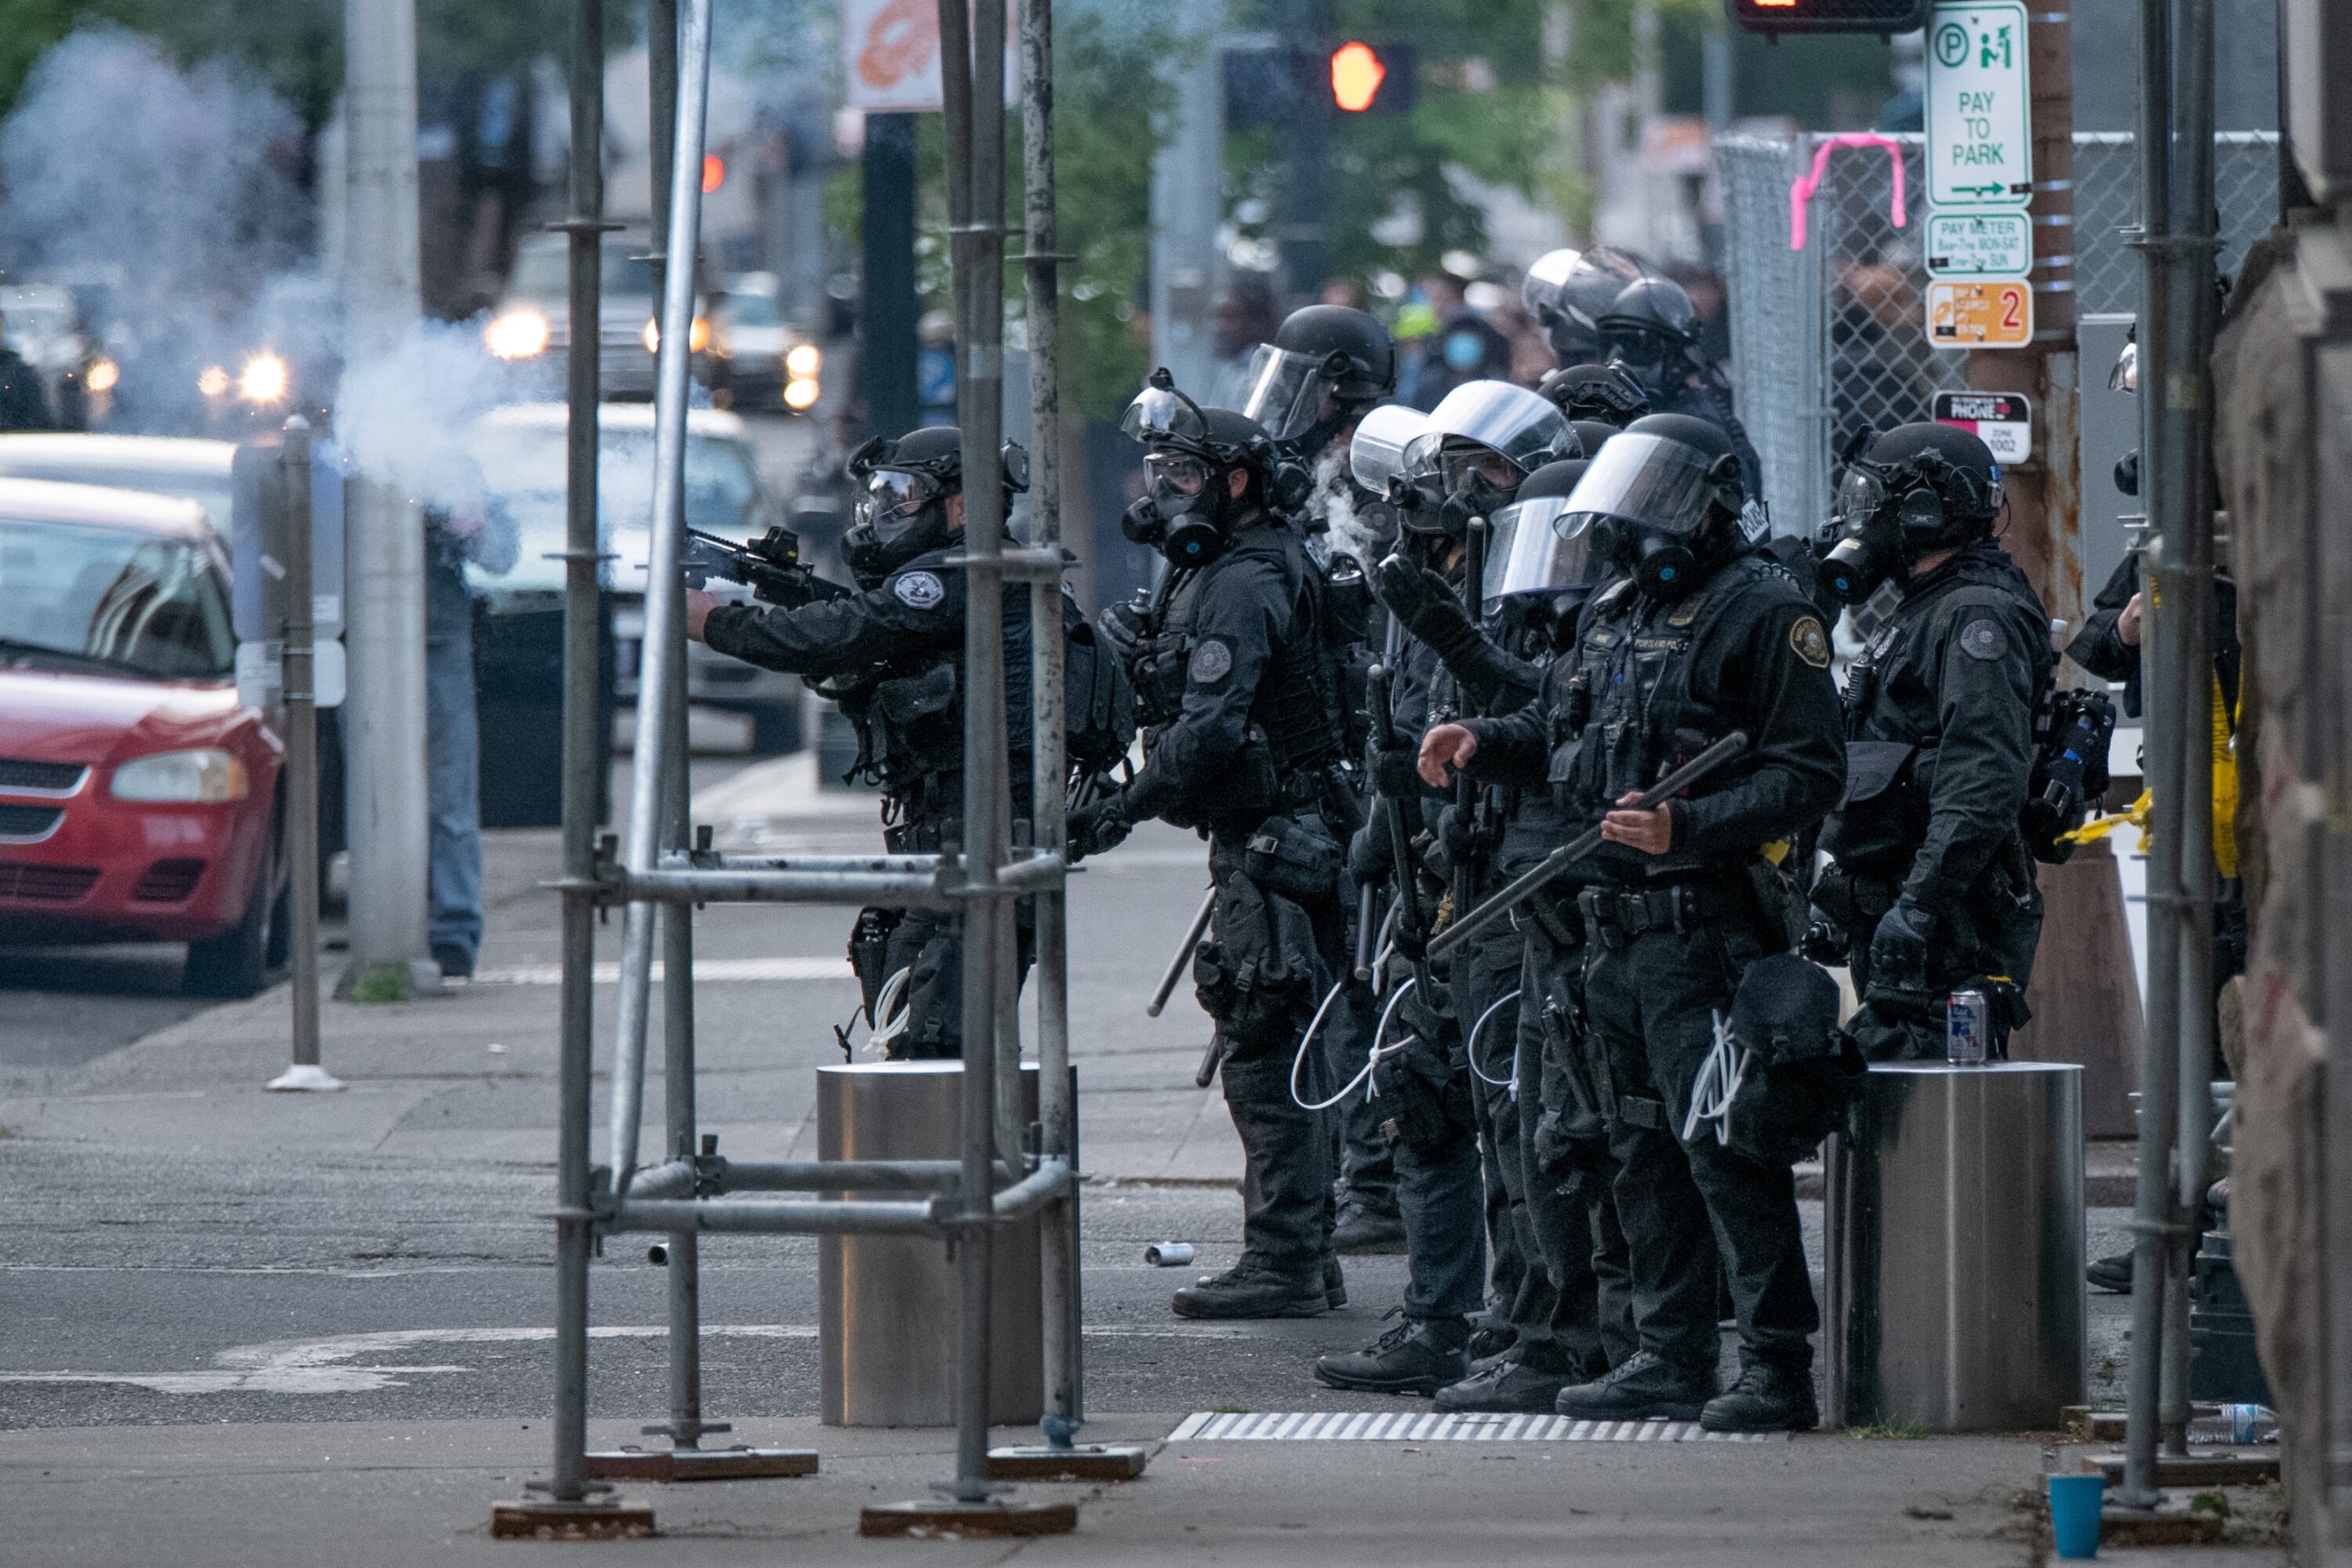 On May 31, Portland Police officers indiscriminately fired into crowds of protesters in front of the Justice Center.